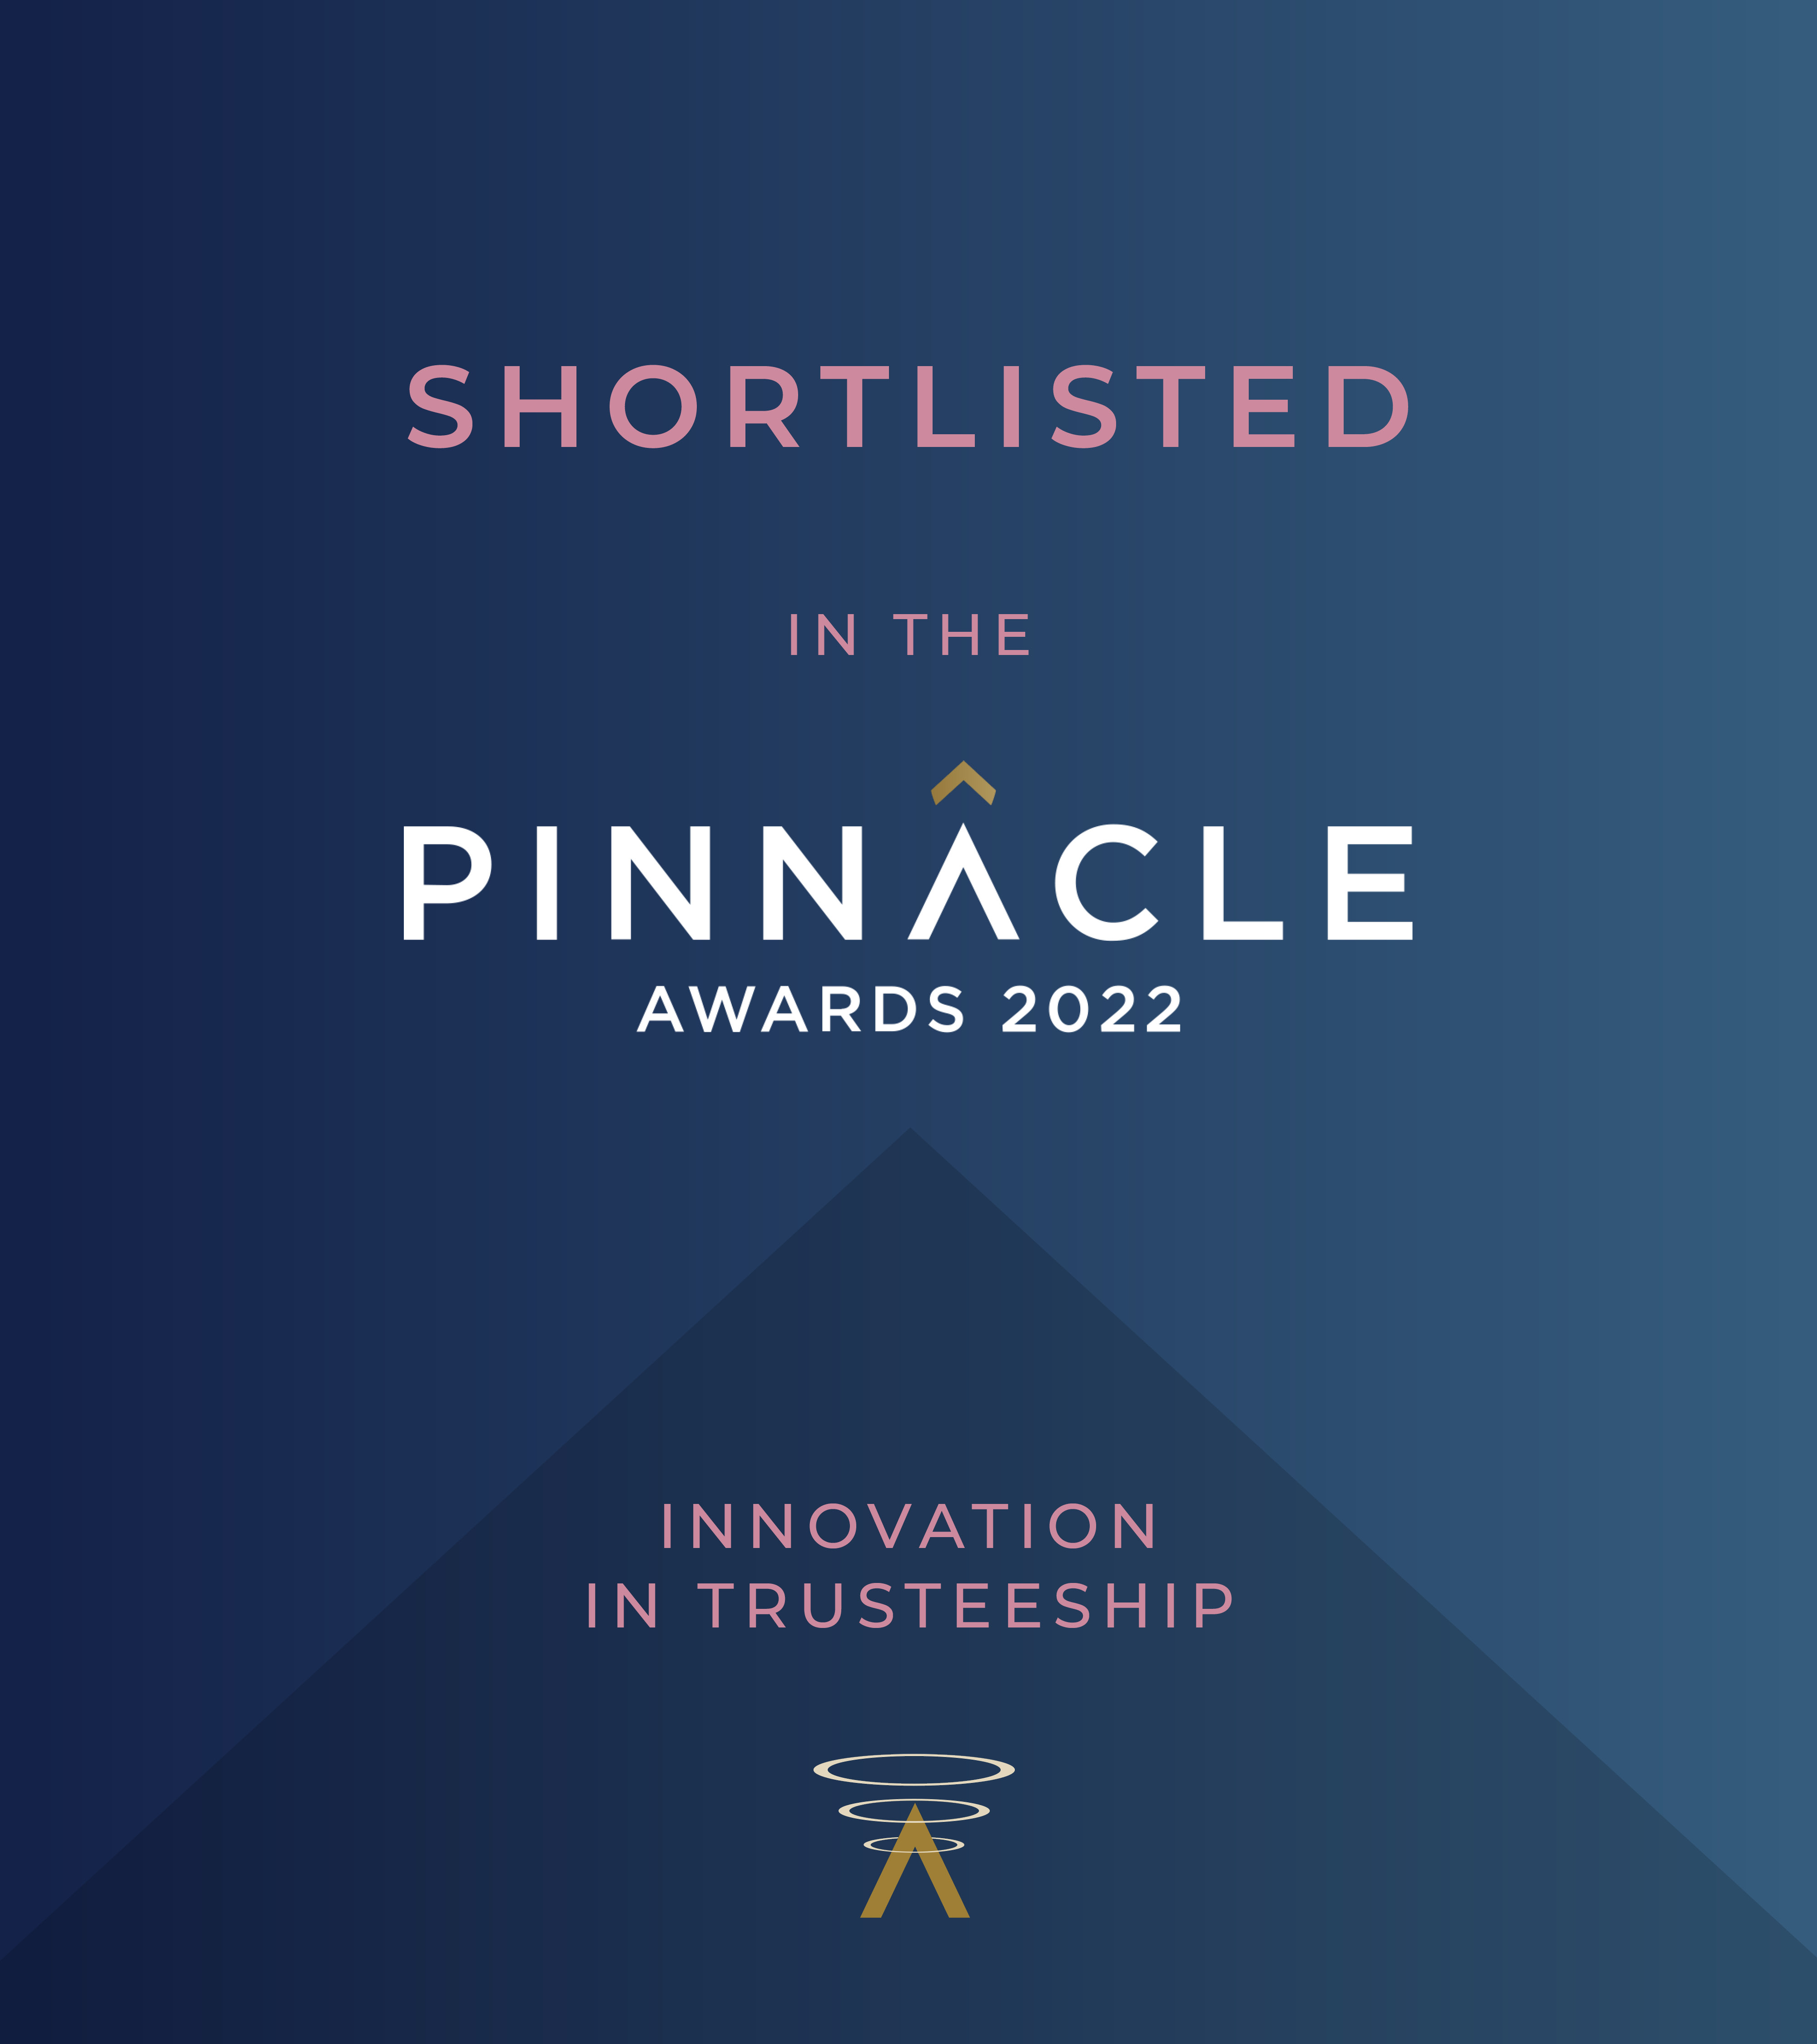 Image for opinion “Pinnacle Awards 2022: PSGS shortlisted as a finalist for Innovation in trusteeship”